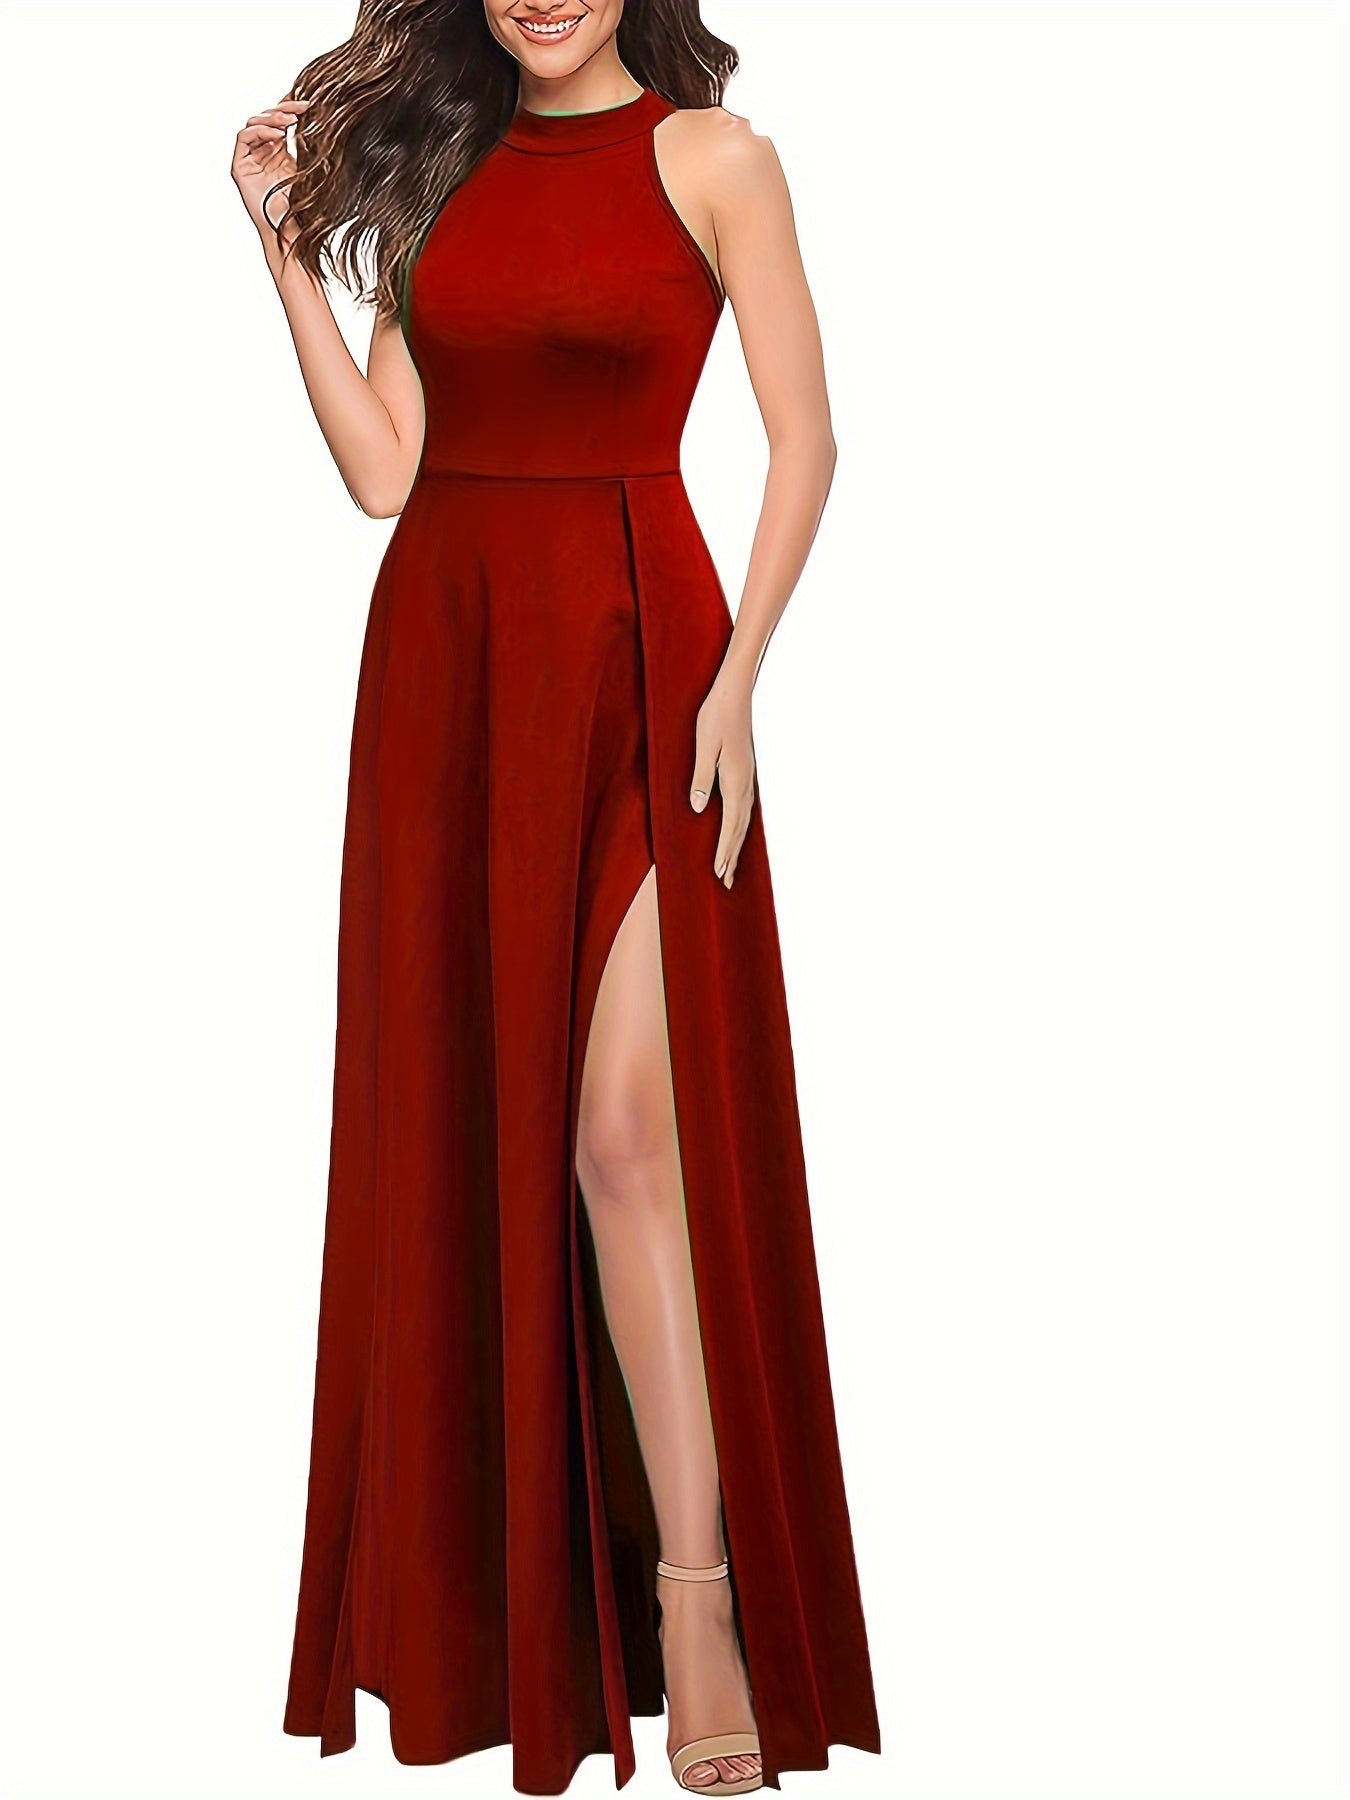 Empower Your Style with Our Elegant Split Thigh Maxi Dress - Women's Clothing Collection